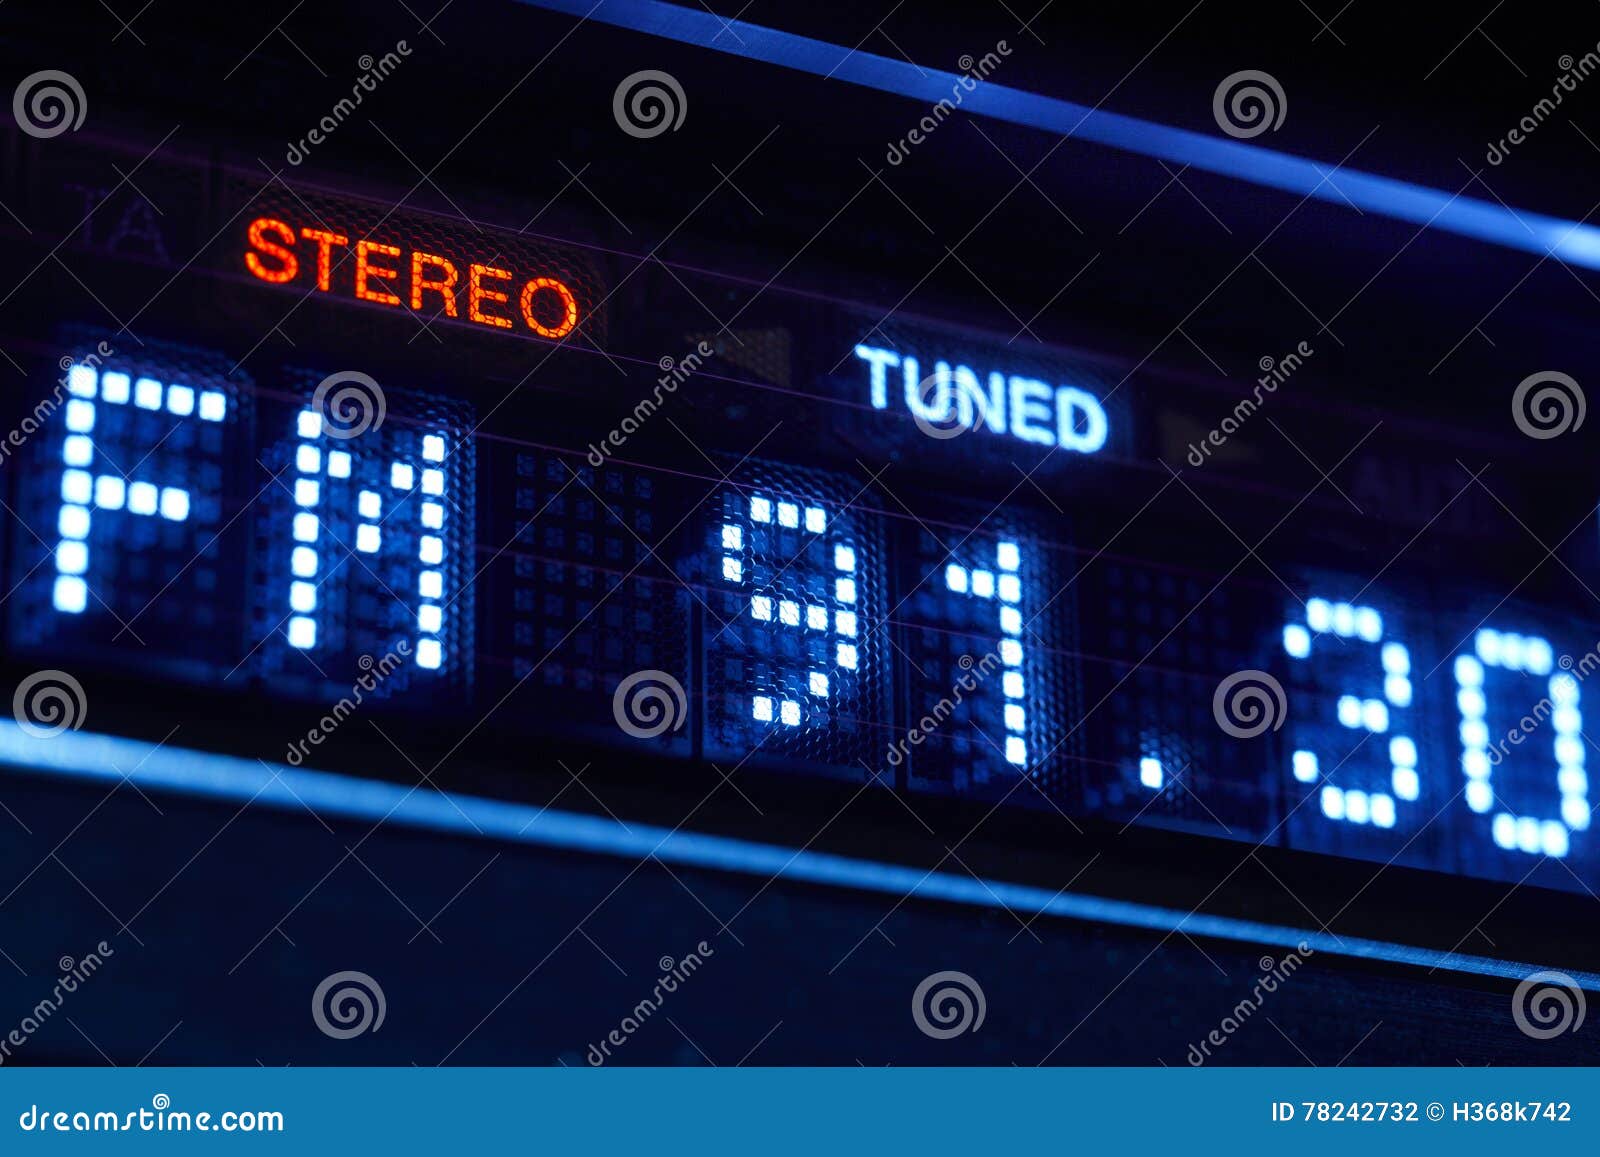 FM Tuner Radio Display. Stereo Digital Frequency Station Tuned Stock Photo  - Image of object, retro: 78242732